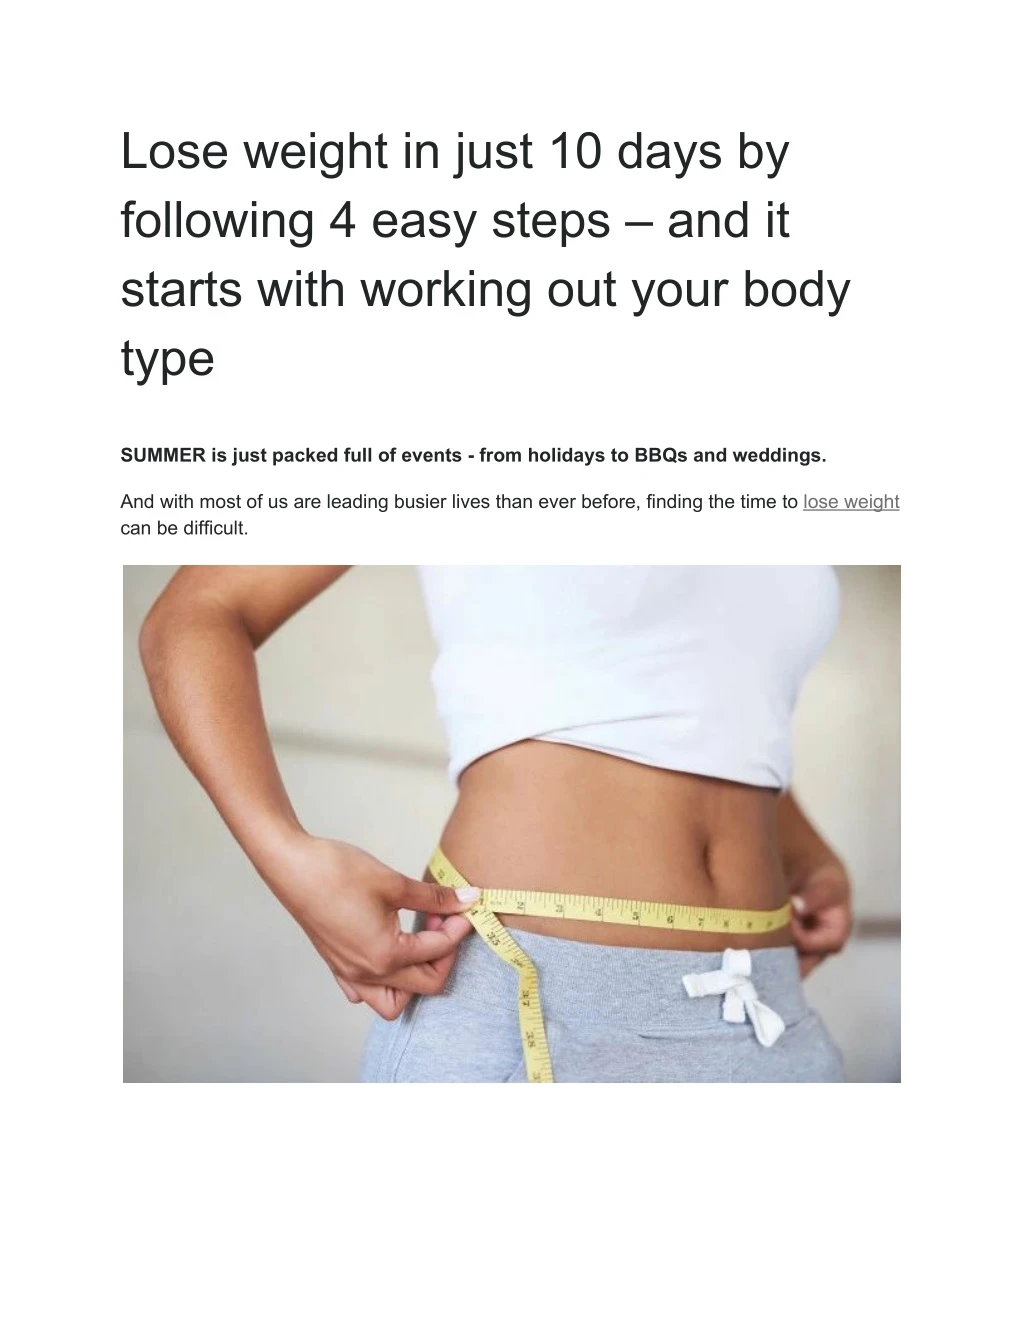 lose weight in just 10 days by following 4 easy